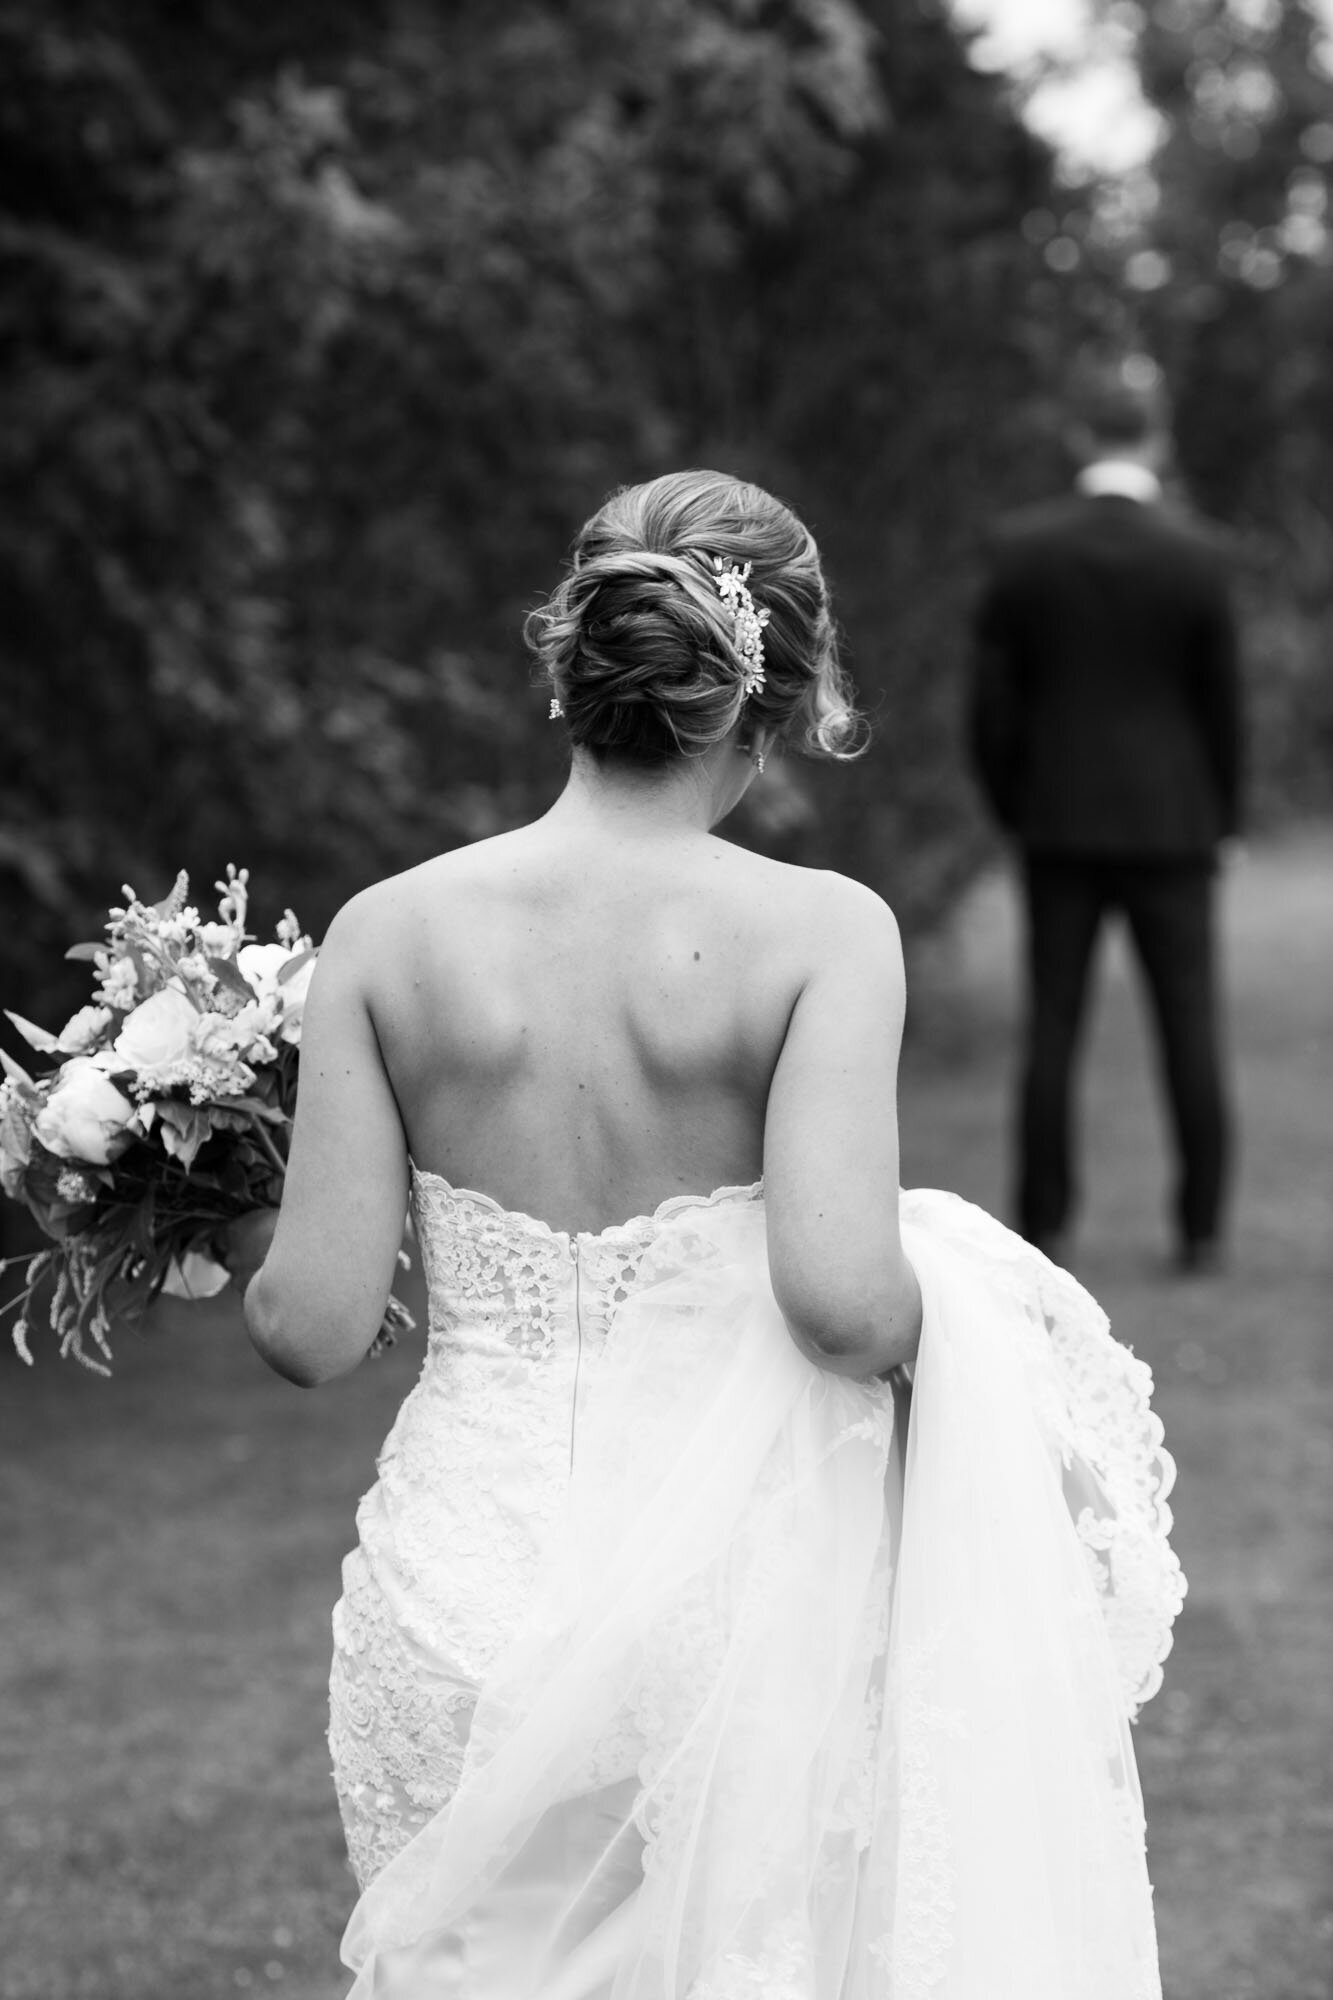 Bride walking with her bouquet and wedding dress in arms to greet her husband during their first look at Pondvalley Manor St Thomas.